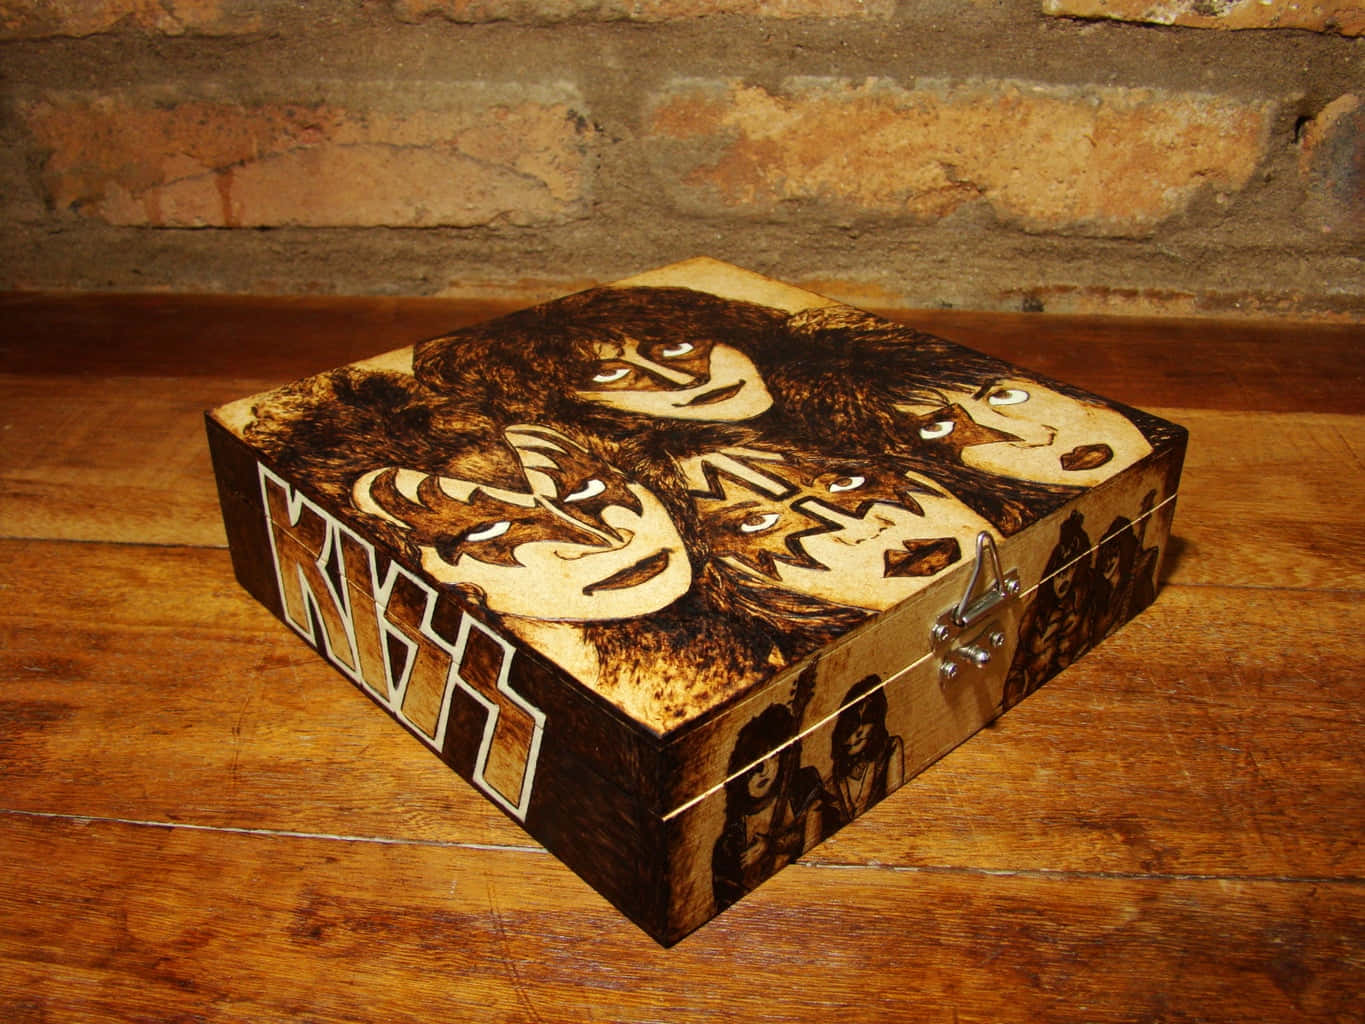 Kiss Box With A Picture Of The Band